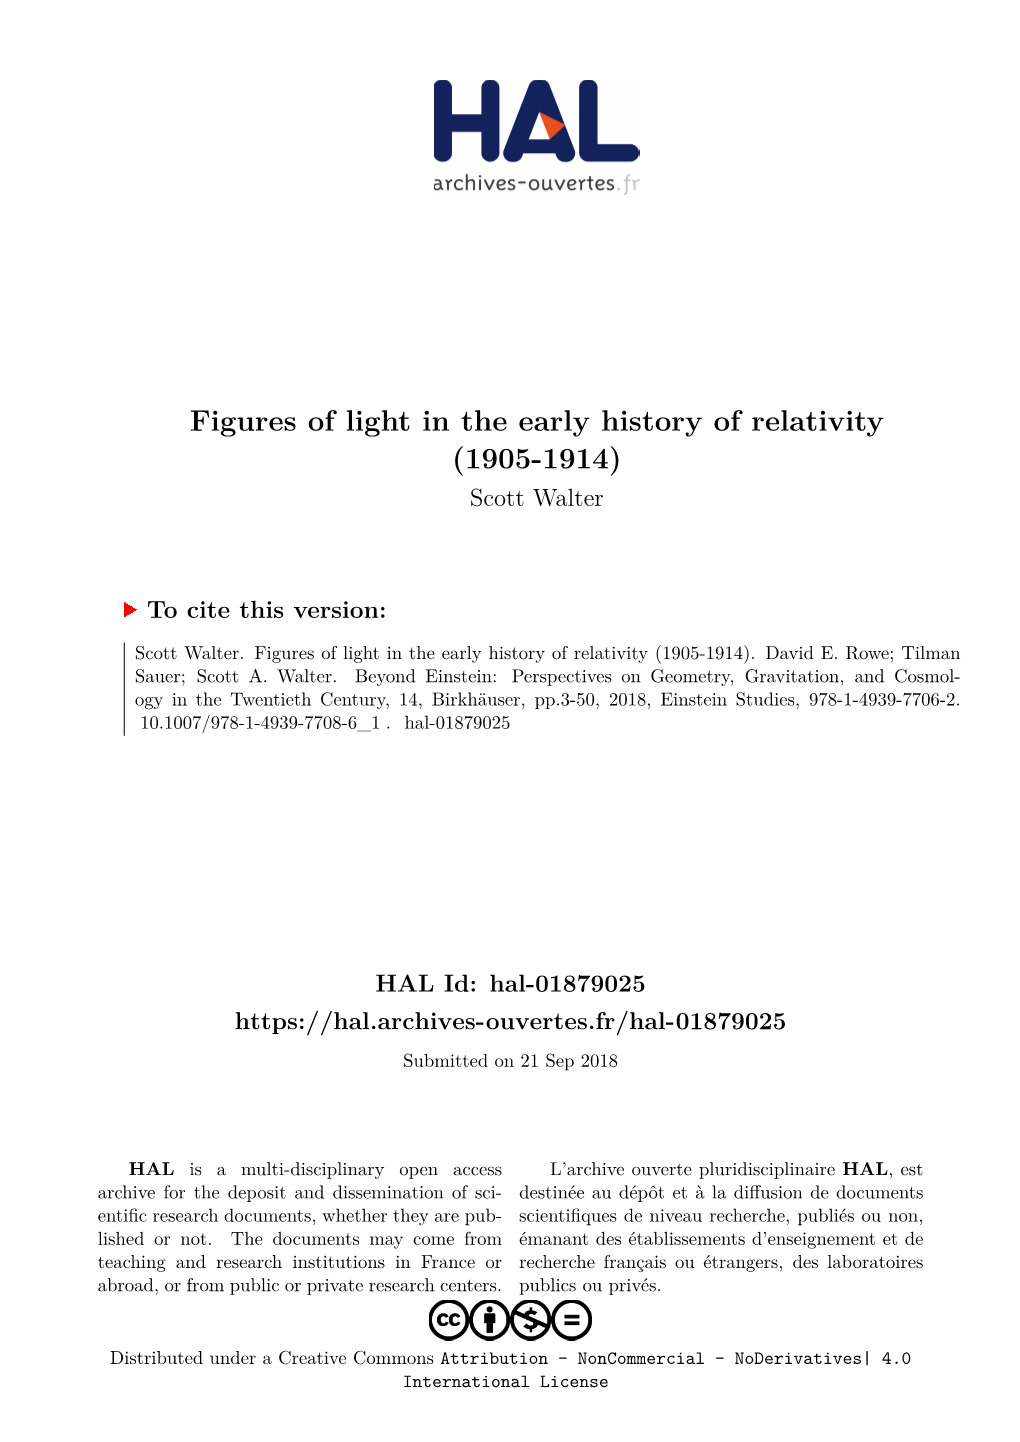 Figures of Light in the Early History of Relativity (1905-1914) Scott Walter